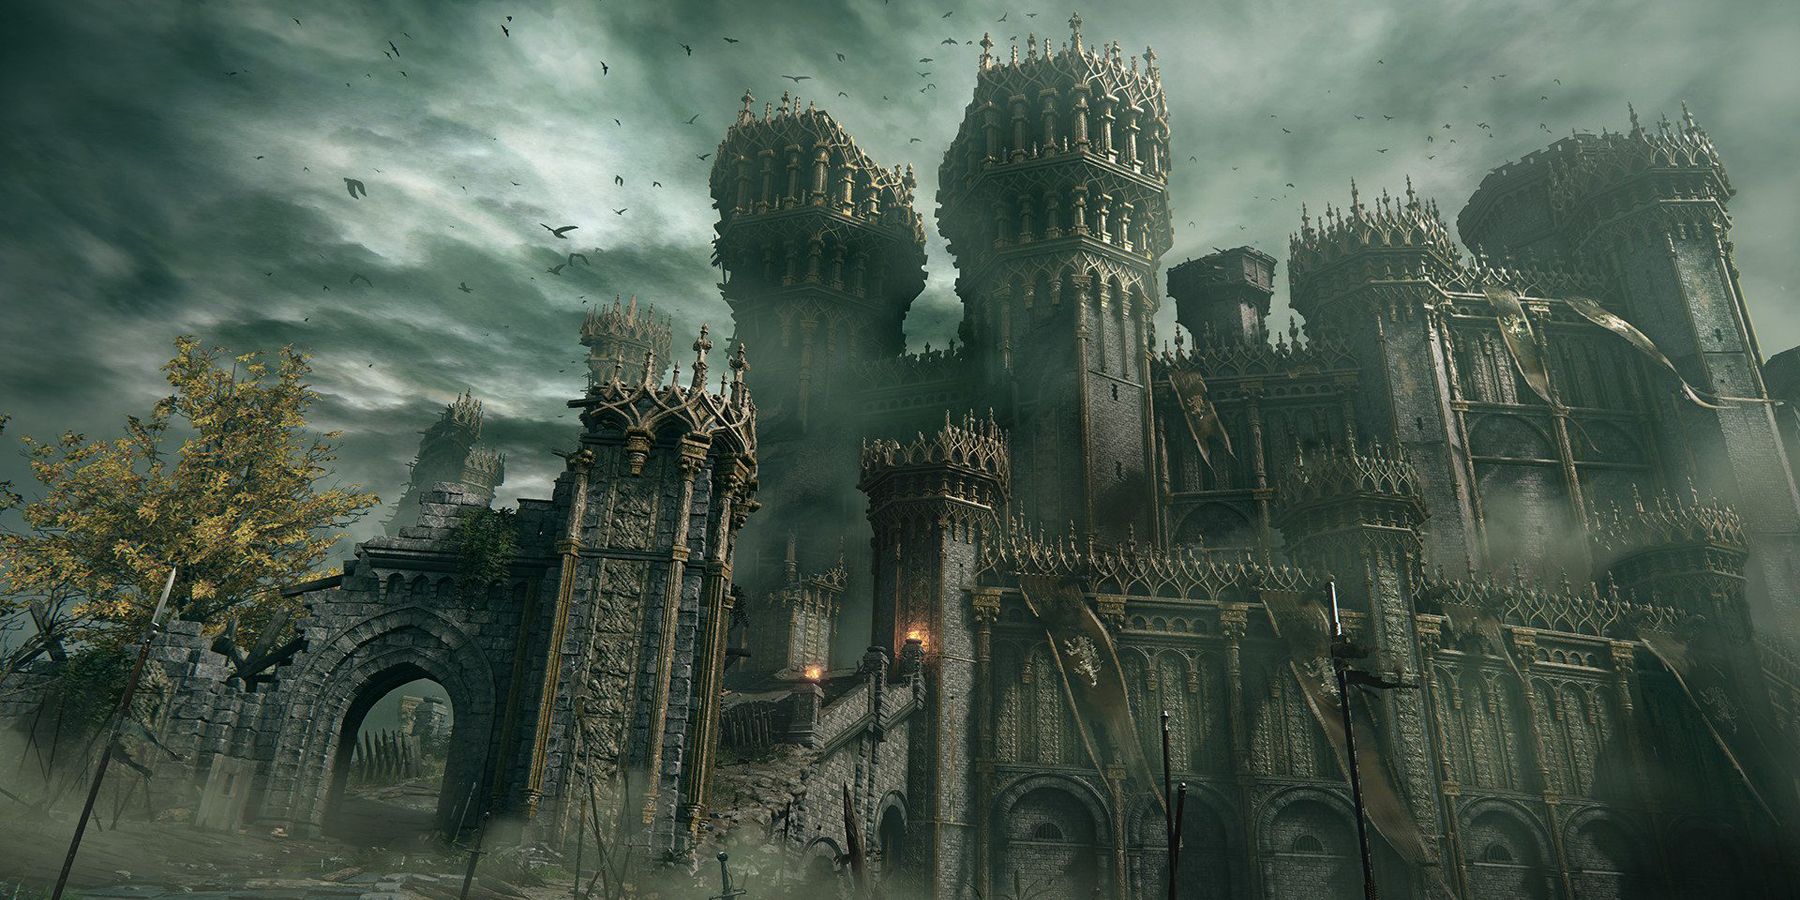 Elden Ring Fans Share Theories About the Holes in Stormveil Castle’s Walls